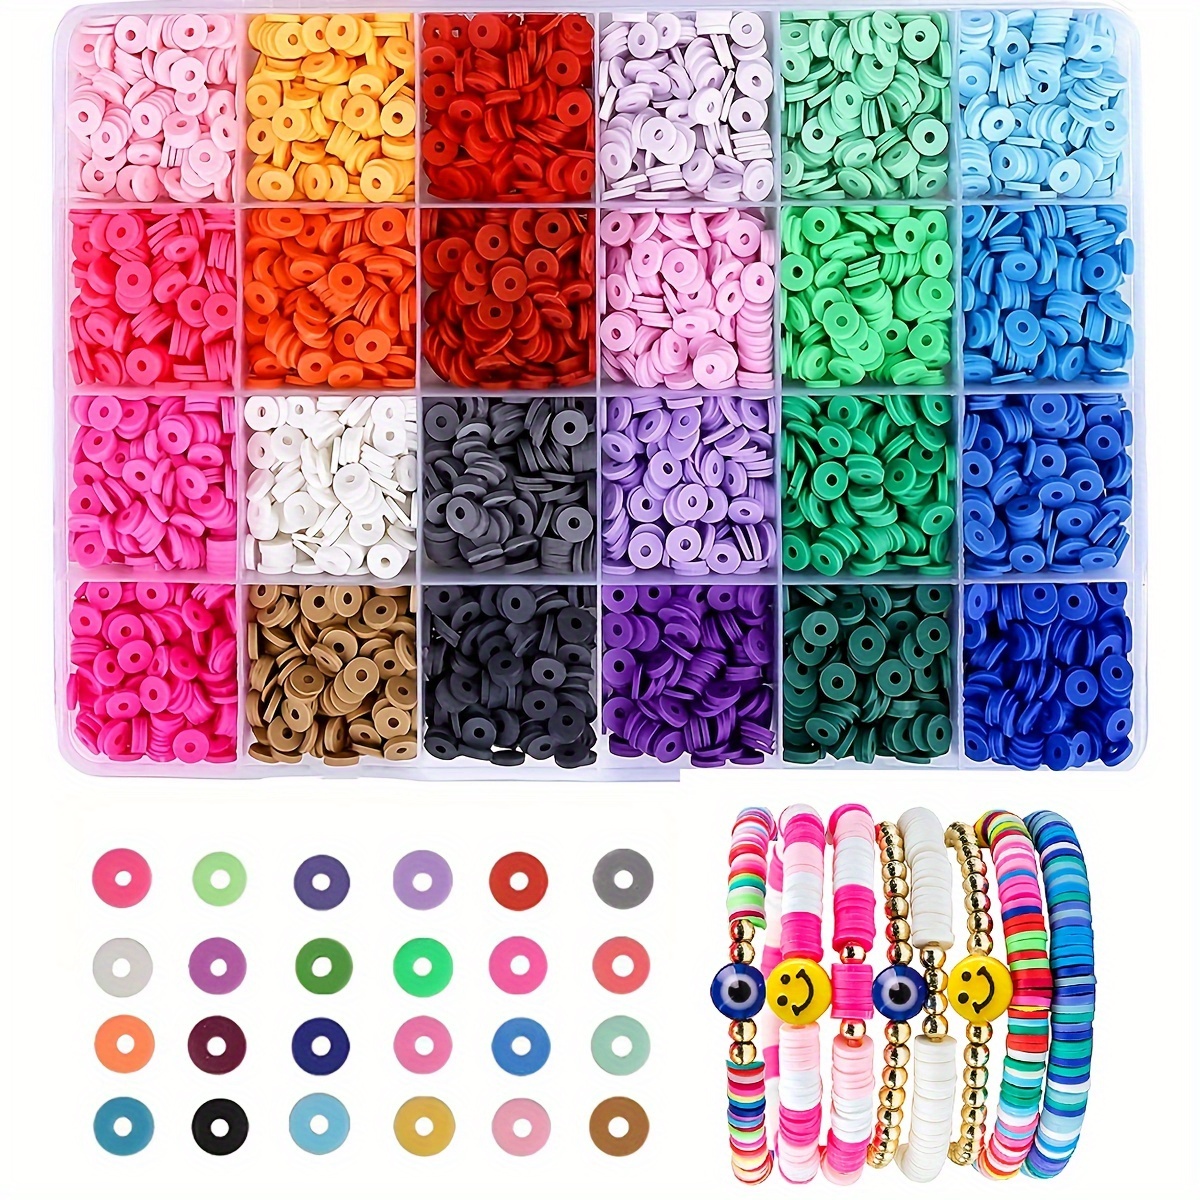 22800 Pieces 60 Strands Polymer Clay Beads 6 mm Round Flat Beads for  Bracelets Handmade Circle Beads for Necklace Jewelry Making DIY Crafts,  Assorted